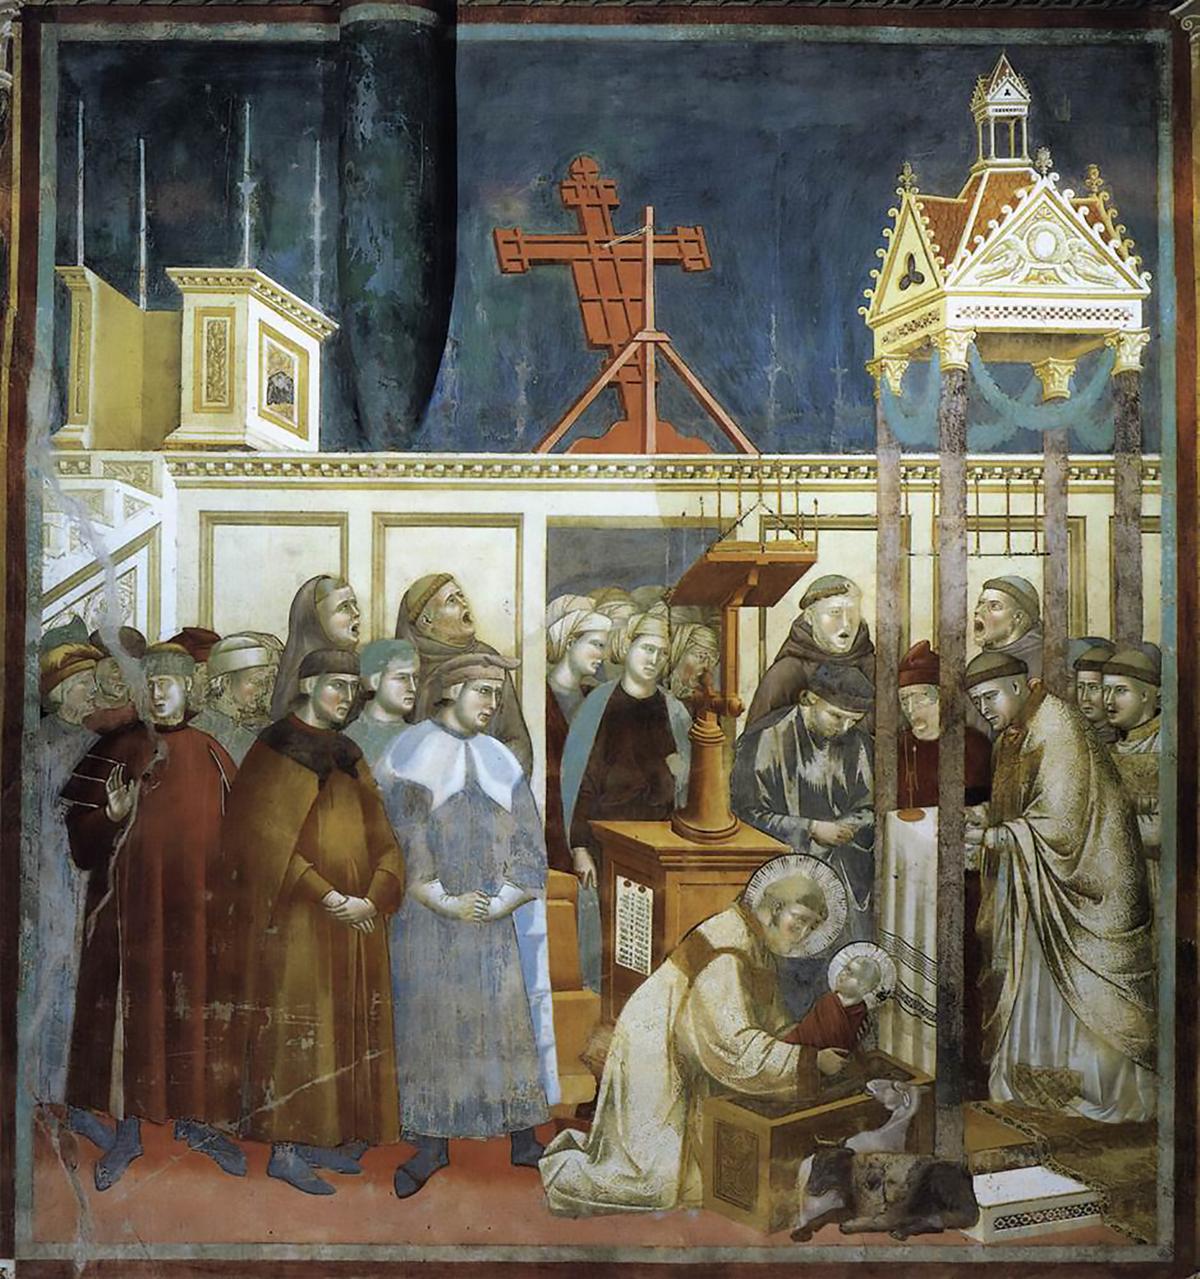 "St. Francis of Assisi Preparing the Christmas Crib at Grecchio," 1297–1300, by Giotto. Fresco. Basilica of Saint Francis of Assisi, Assisi, Italy. (Public Domain)